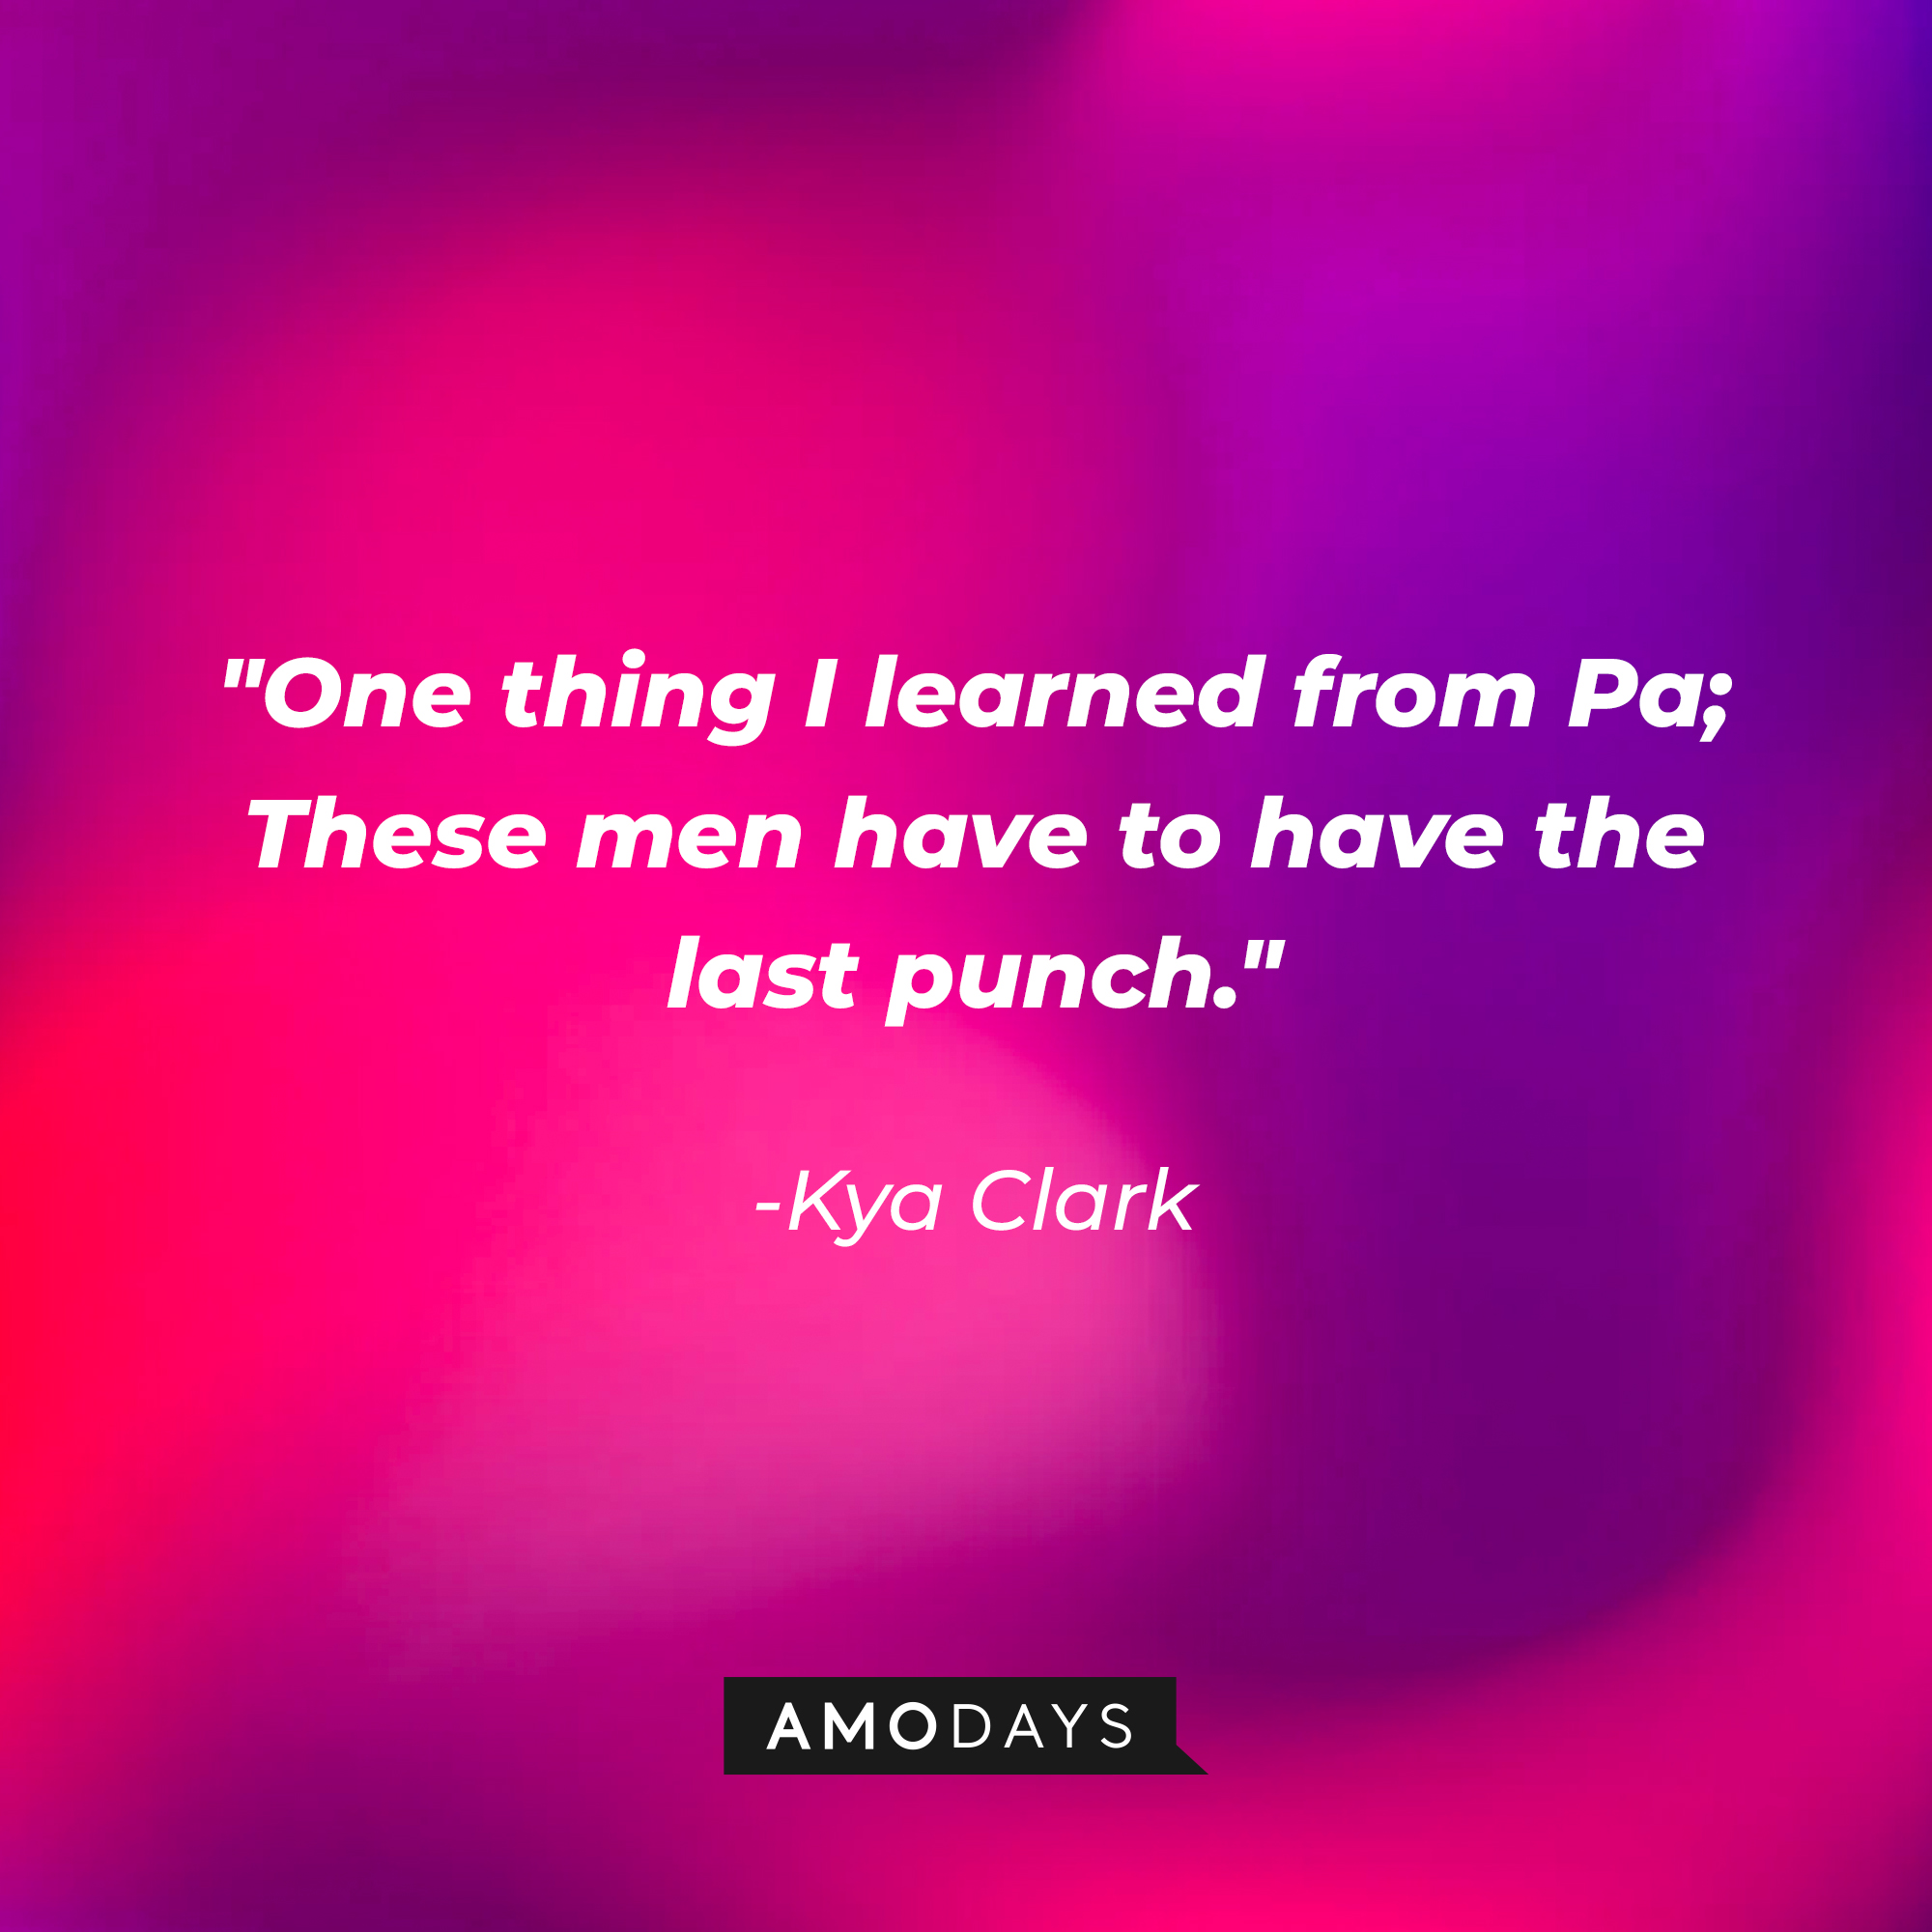 Kya Clark’s quote: "One thing I learned from Pa; These men have to have the last punch." │Source: AmoDays